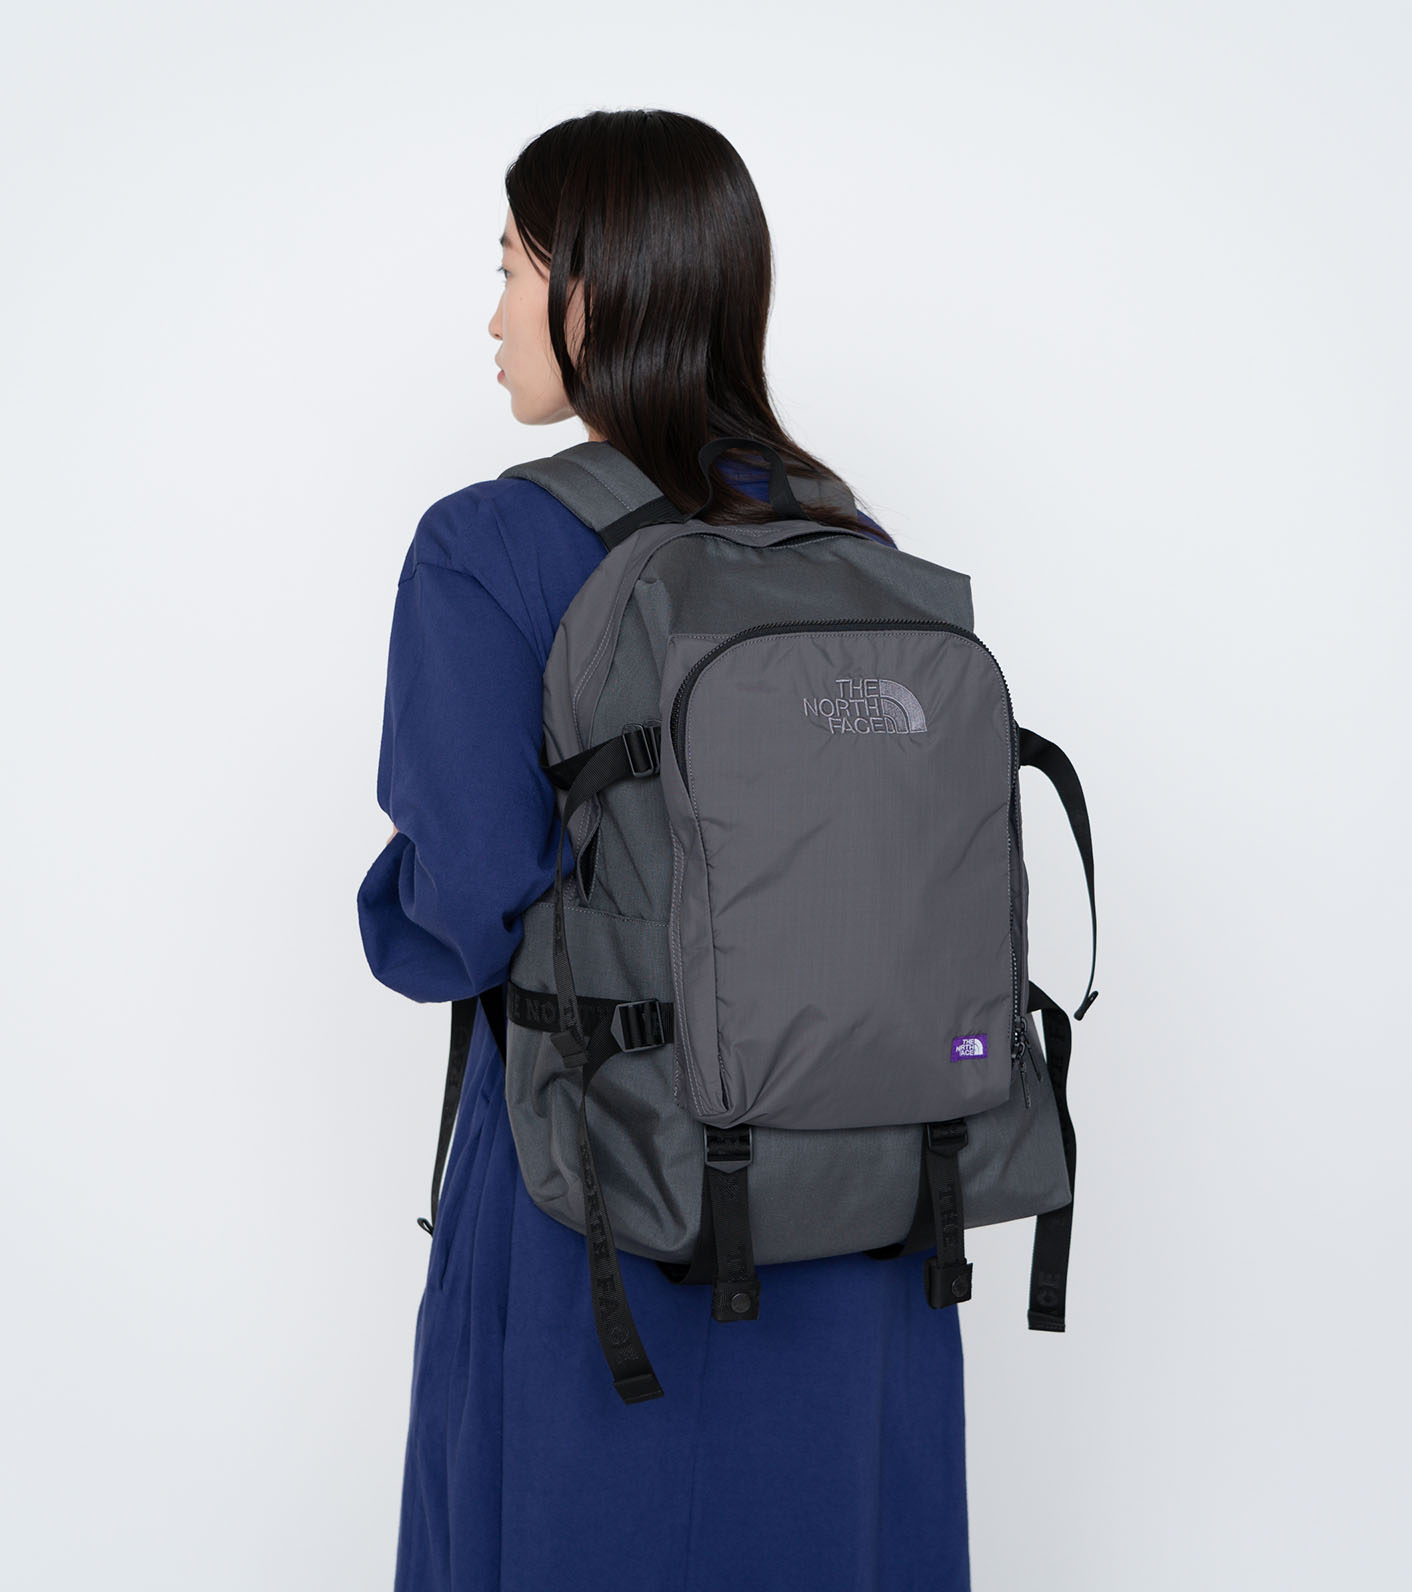 THE NORTH FACE PURPLE LABEL Day Pack 新品即完売になった商品で